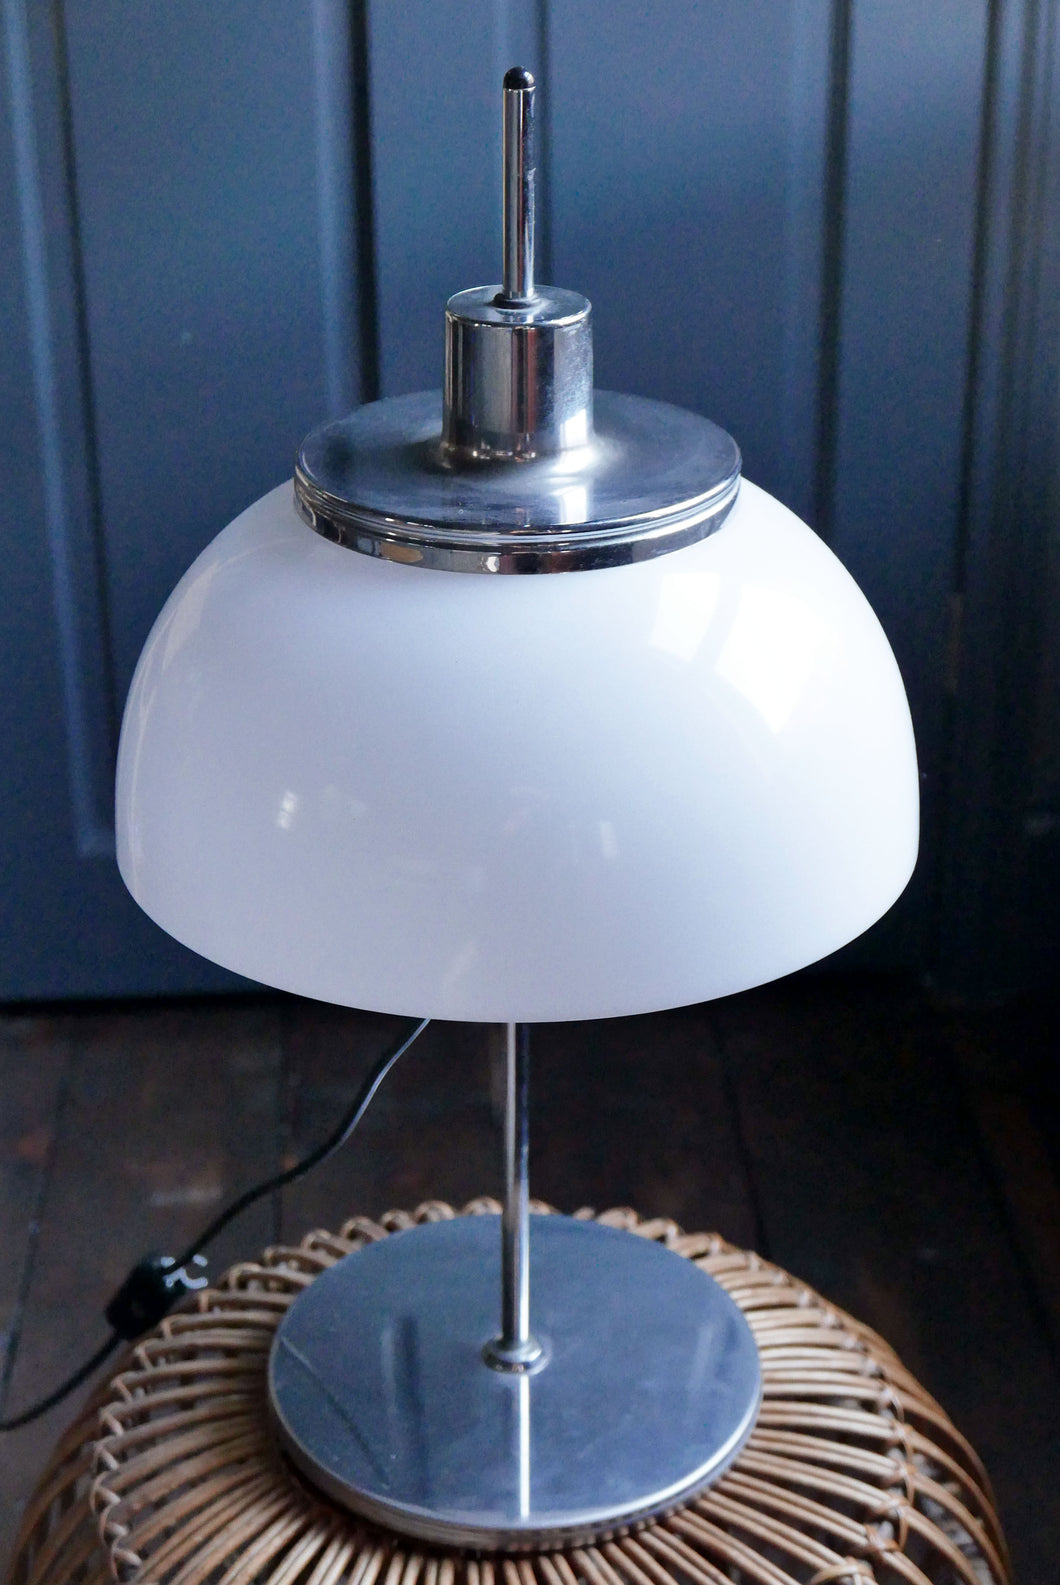 Mid Century Vintage Retro table lamp made in the 1970s by Meblo, Yugoslavia and designed by Italian designer Harvey Guzzini. Made with Chrome and a White Perspex Shade this is a perfect piece for a mid Century Modern Interior 